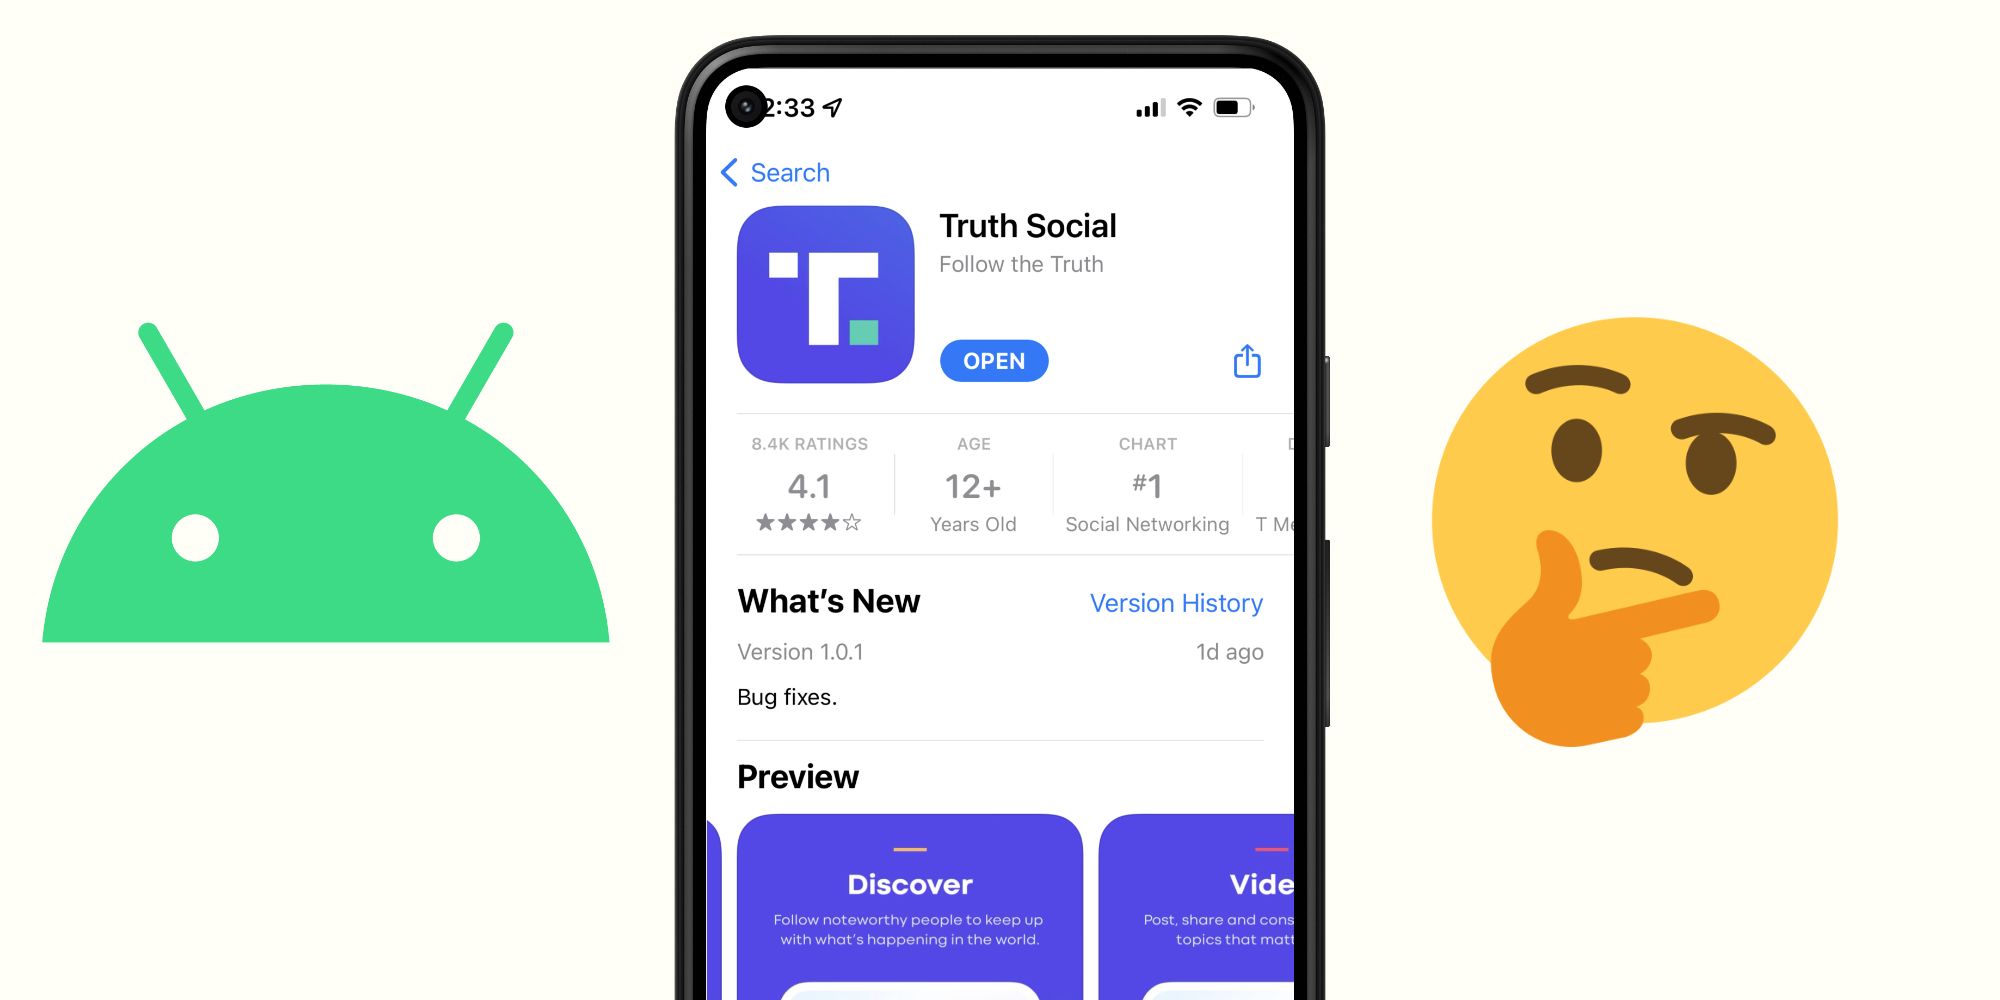 Truth Social app next to the Android logo